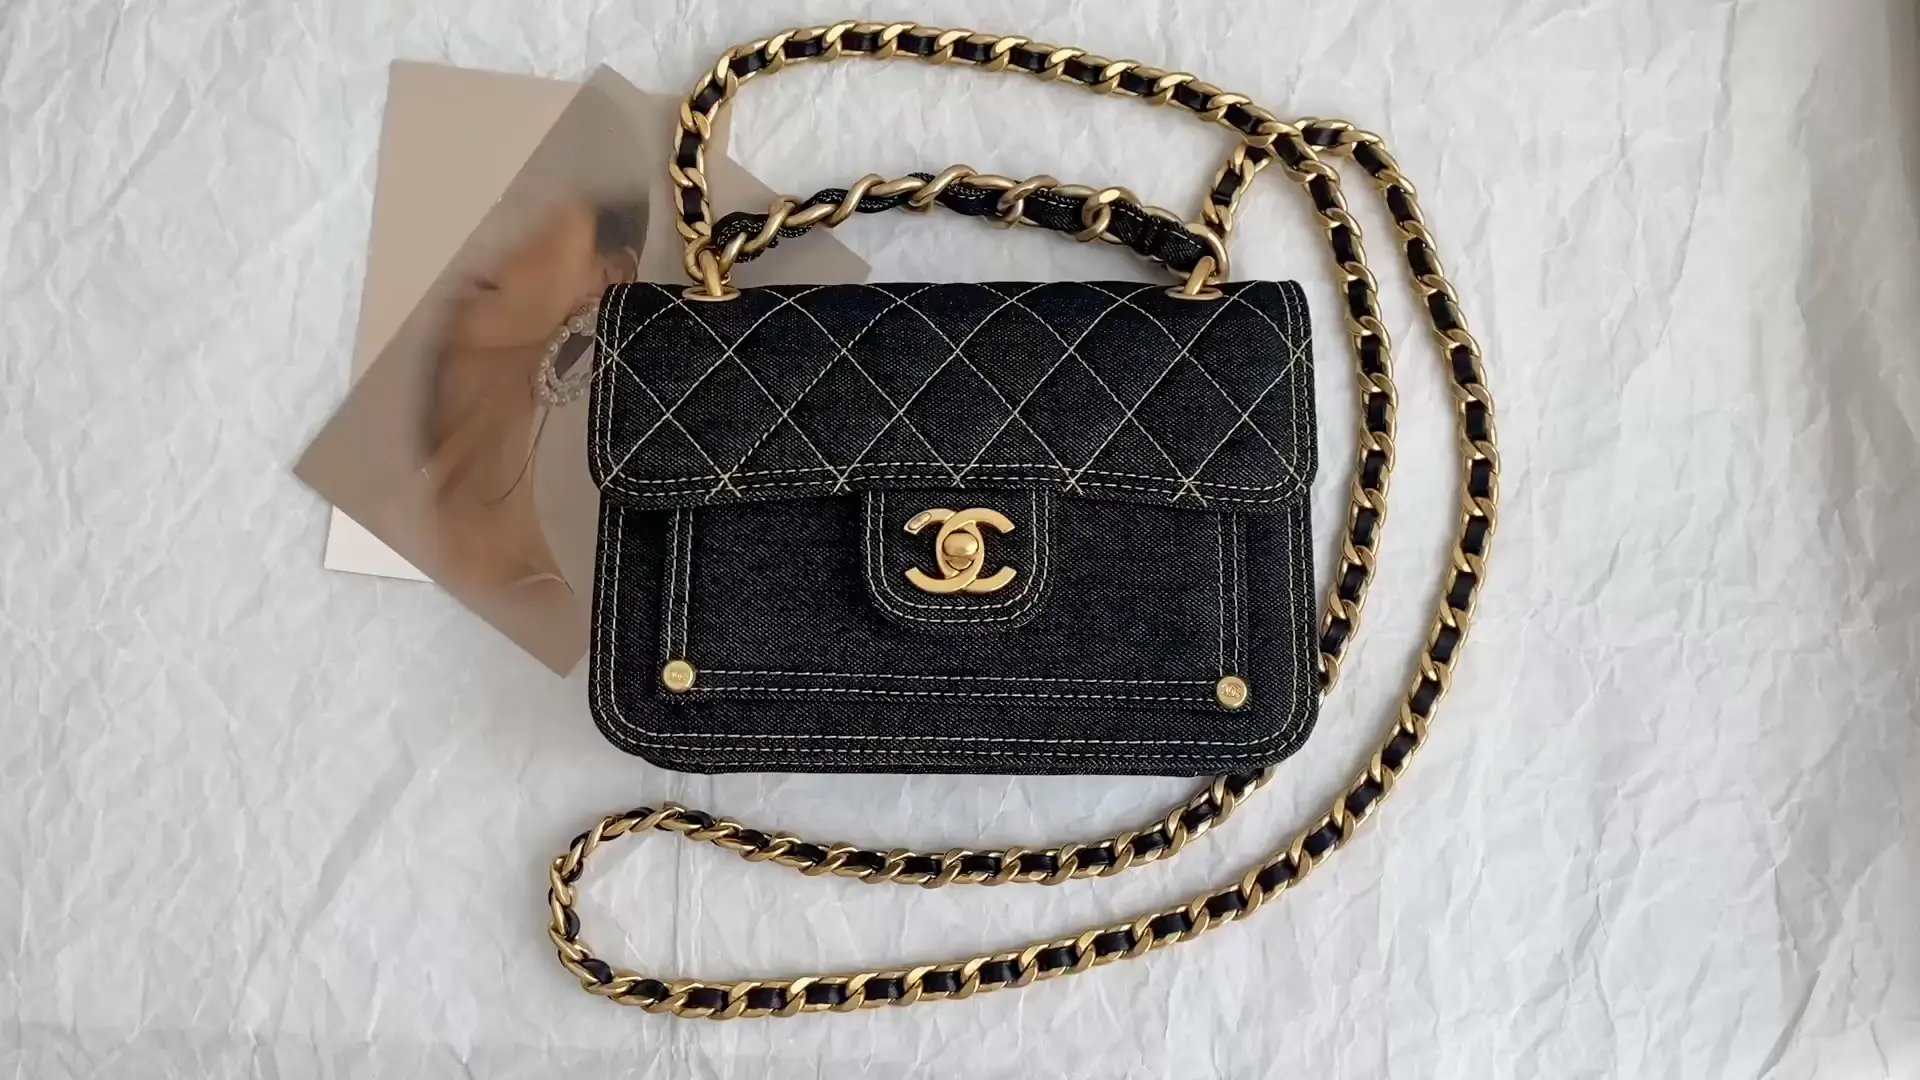 New Chanel bag, Video published by Yuki